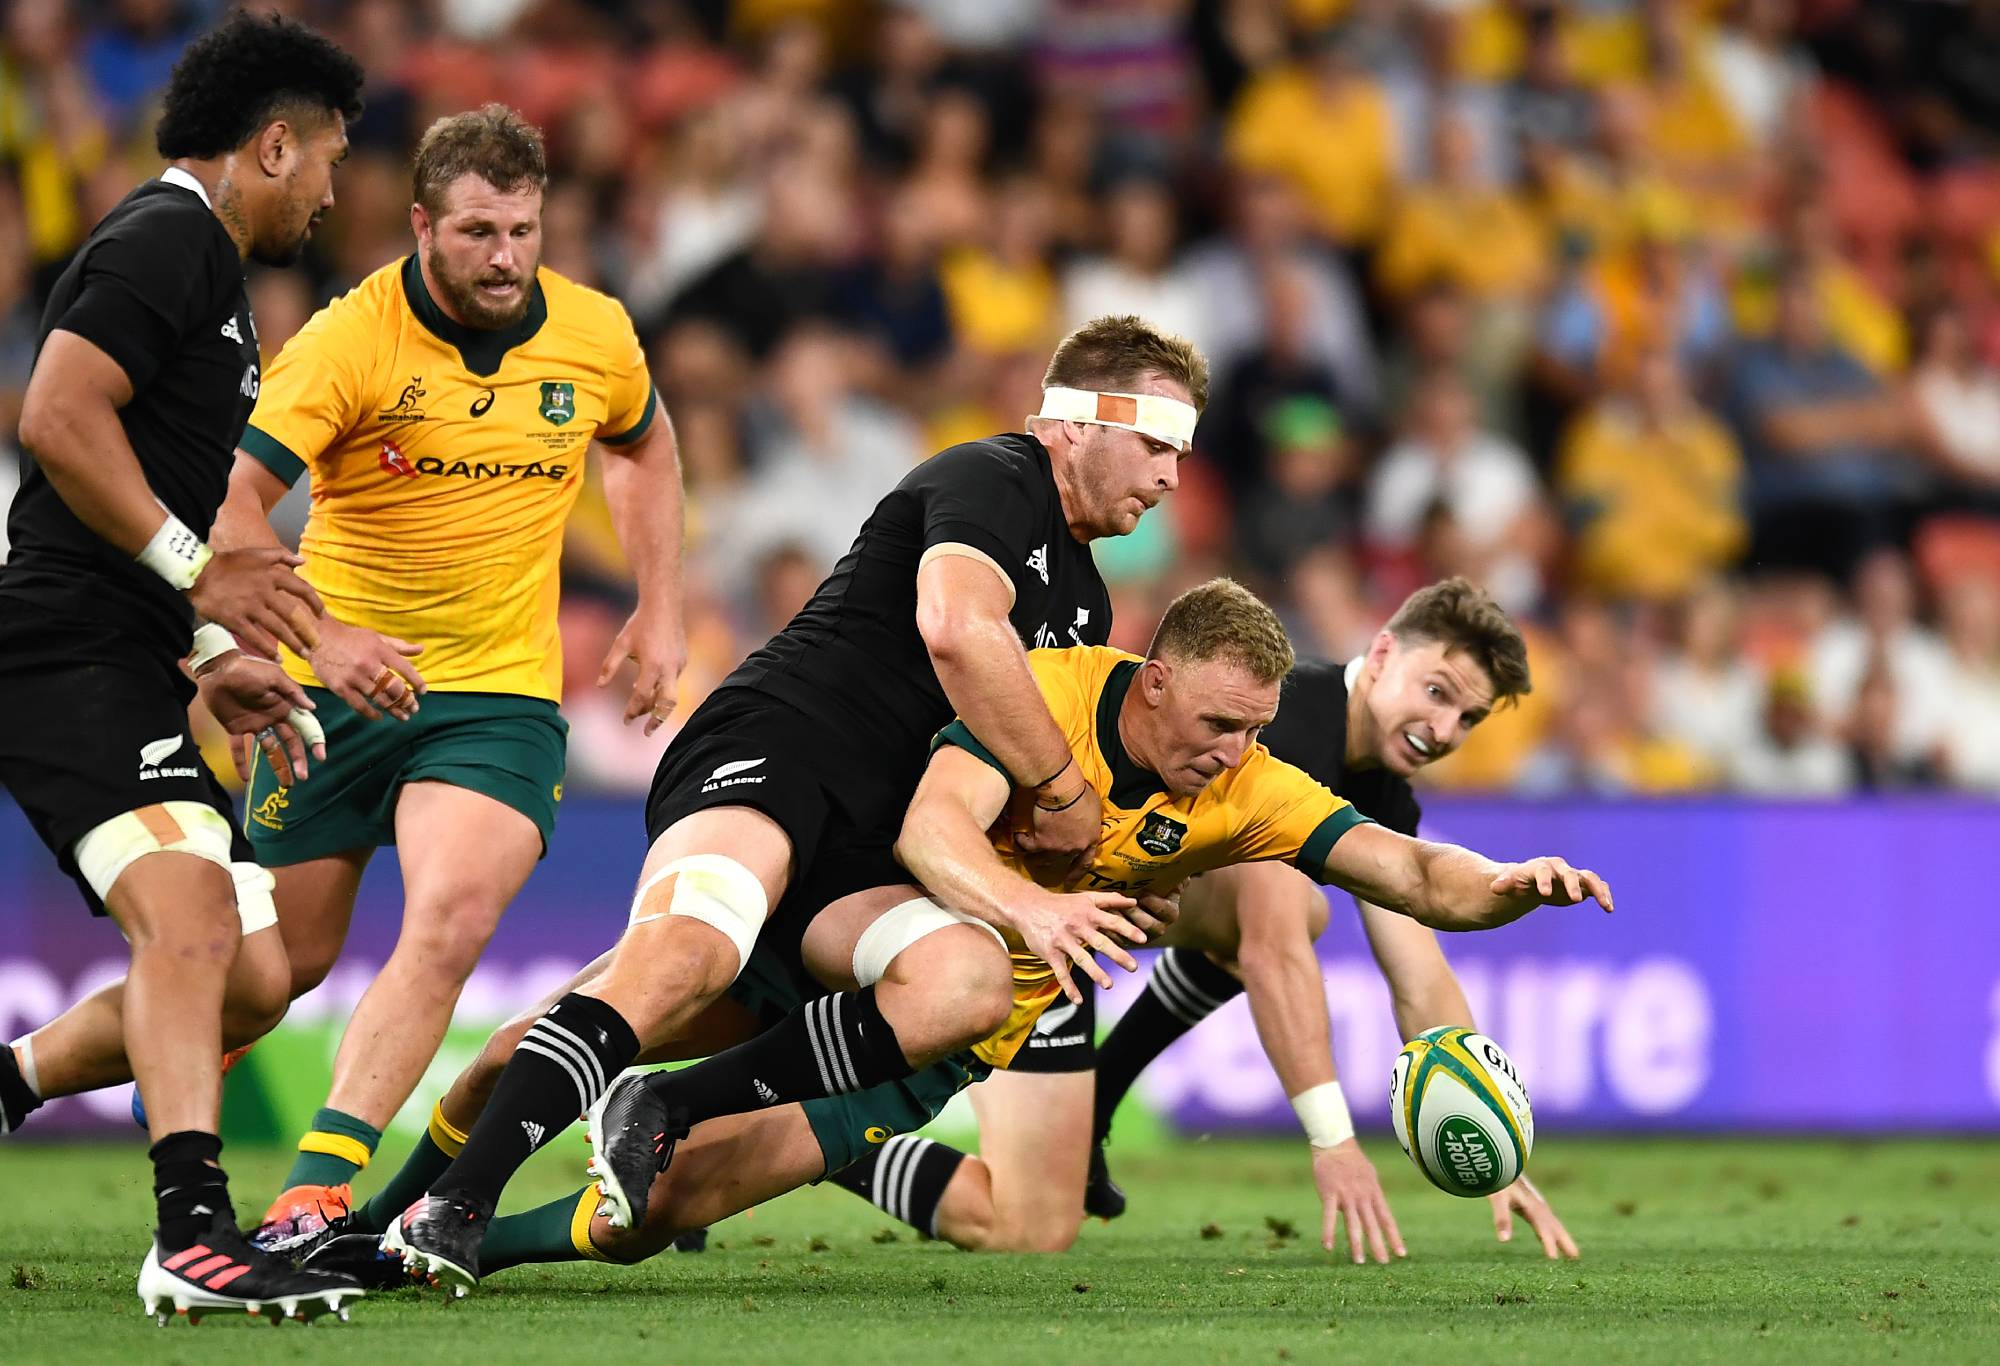 Reece Hodge of the Wallabies drops the ball while tackled during the 2020 Tri-Nations match between the Australian Wallabies and the New Zealand All Blacks at Suncorp Stadium on November 07, 2020 in Brisbane, Australia. (Photo by Albert Perez/Getty Images)